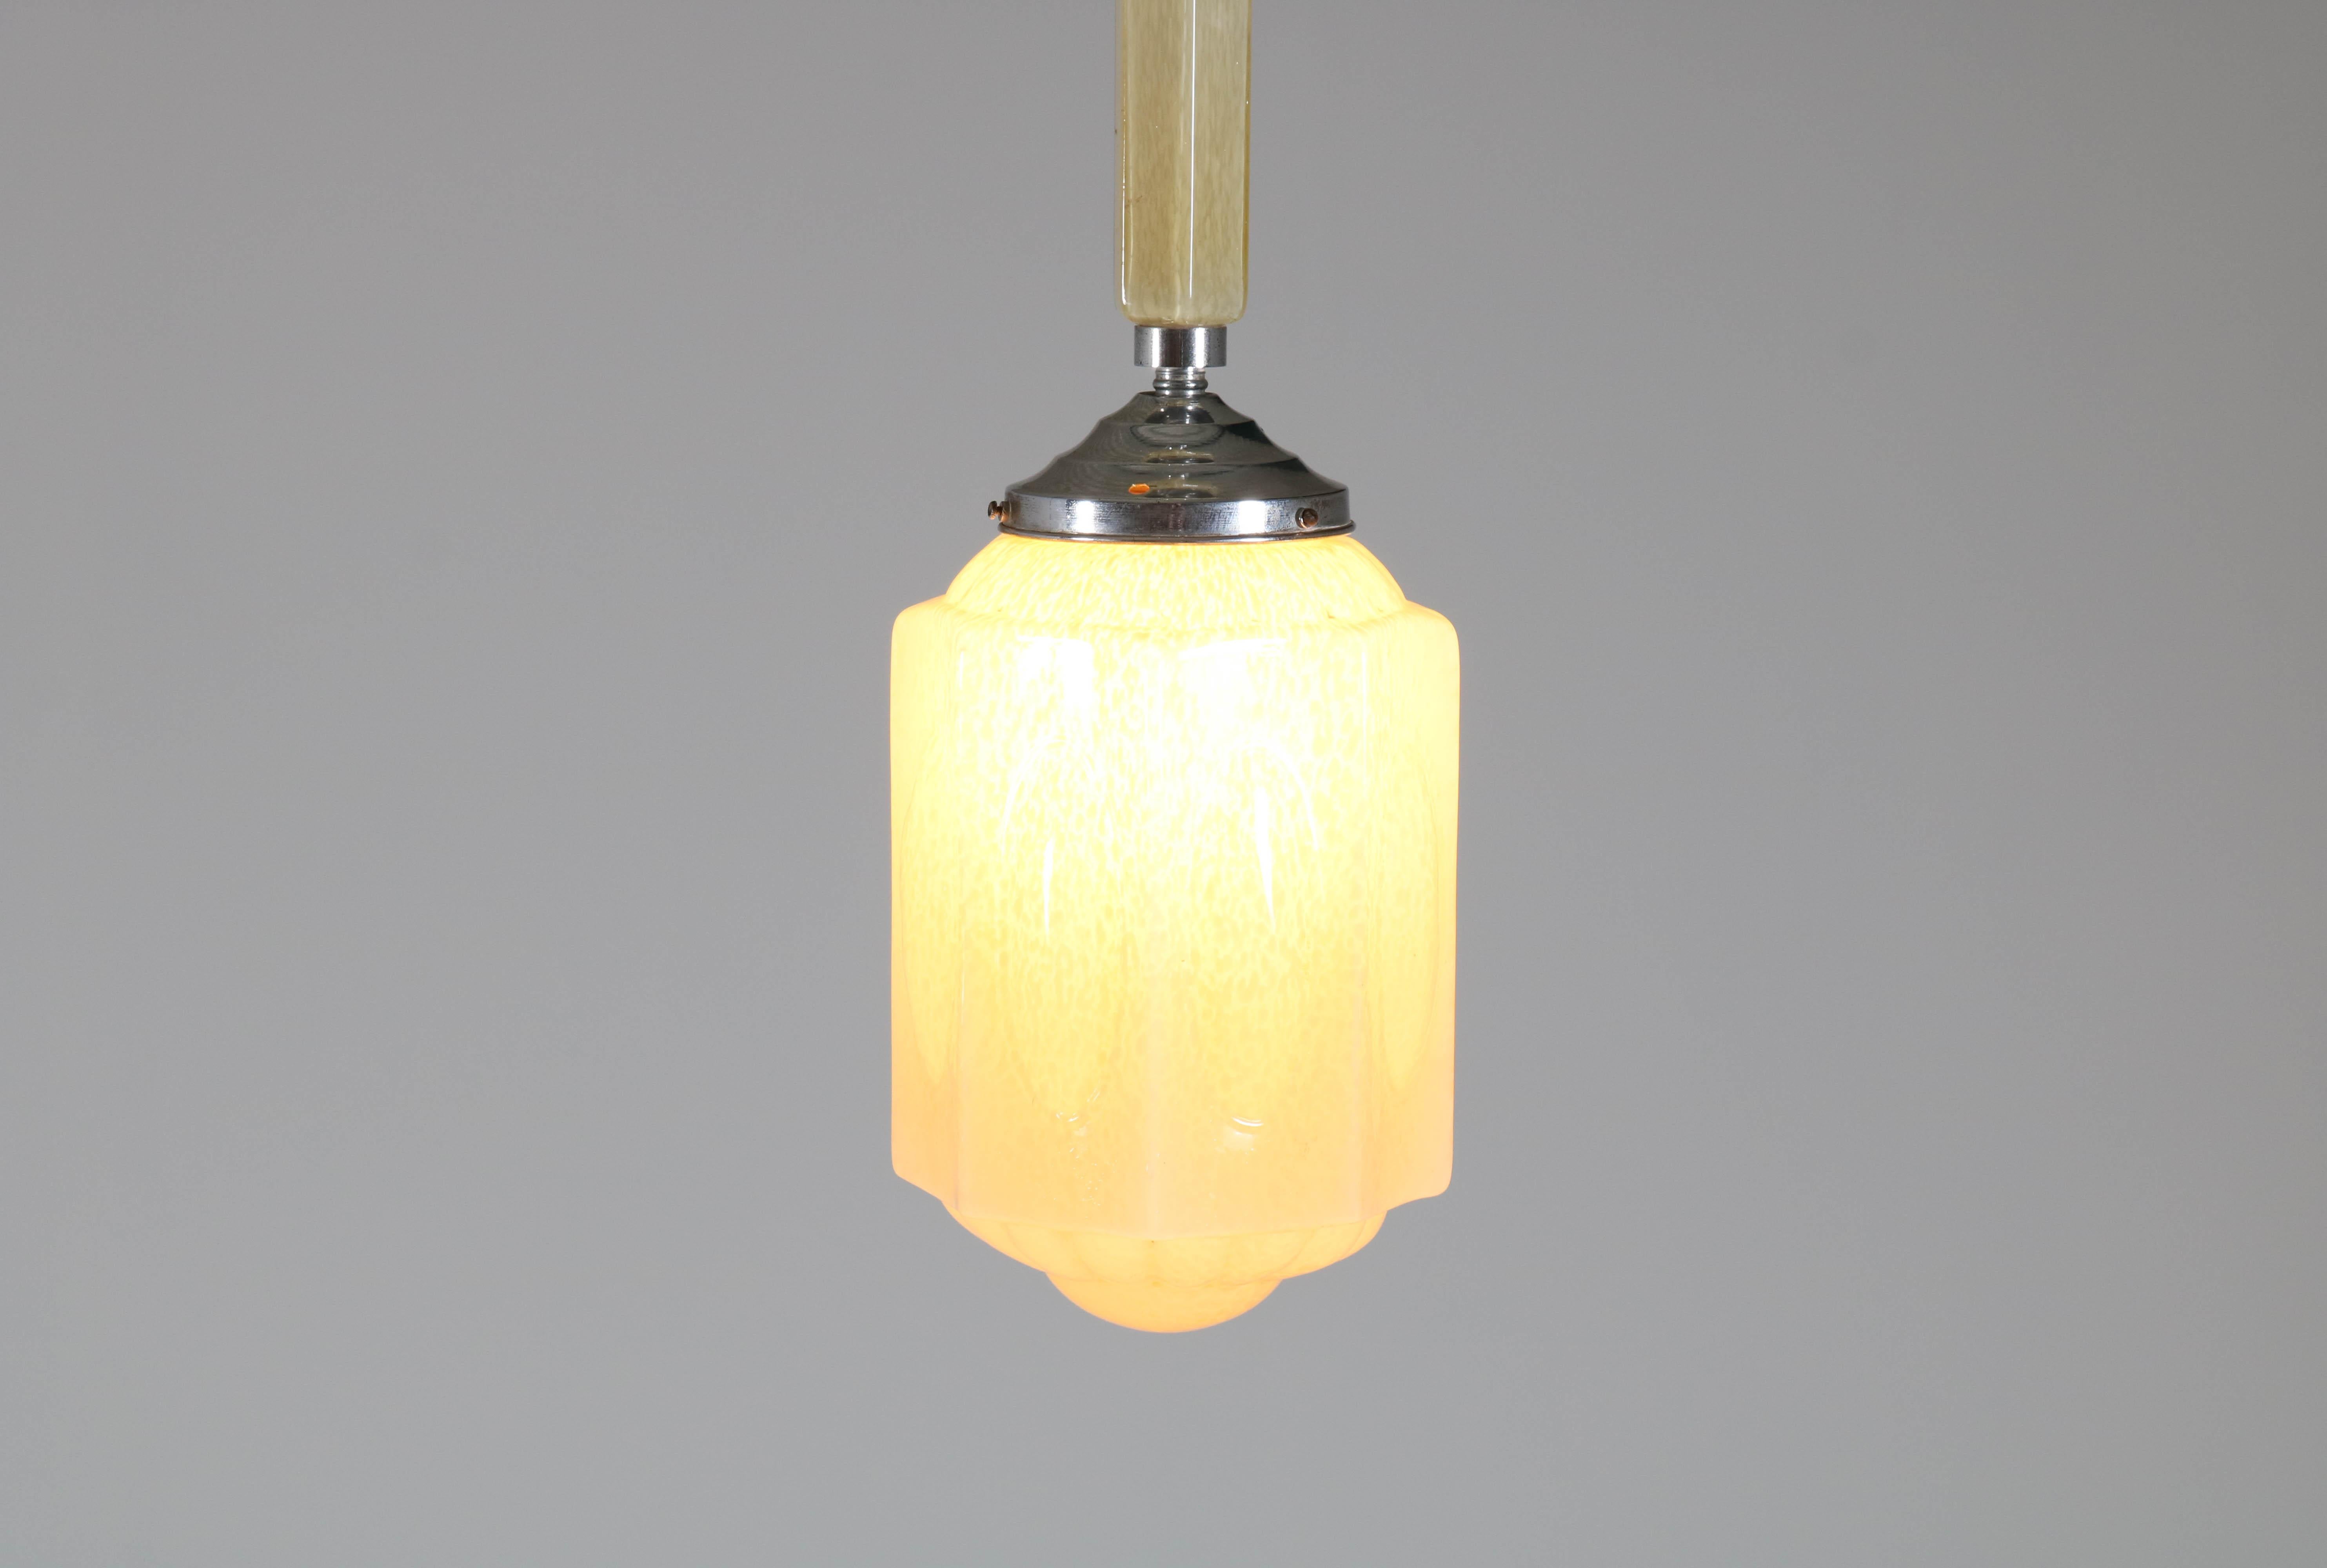 Elegant Art Deco pendant lamp.
Striking French design from the thirties.
Chrome with original glass and shade.
In good original condition with minor wear consistent with age and use,
preserving a beautiful patina.